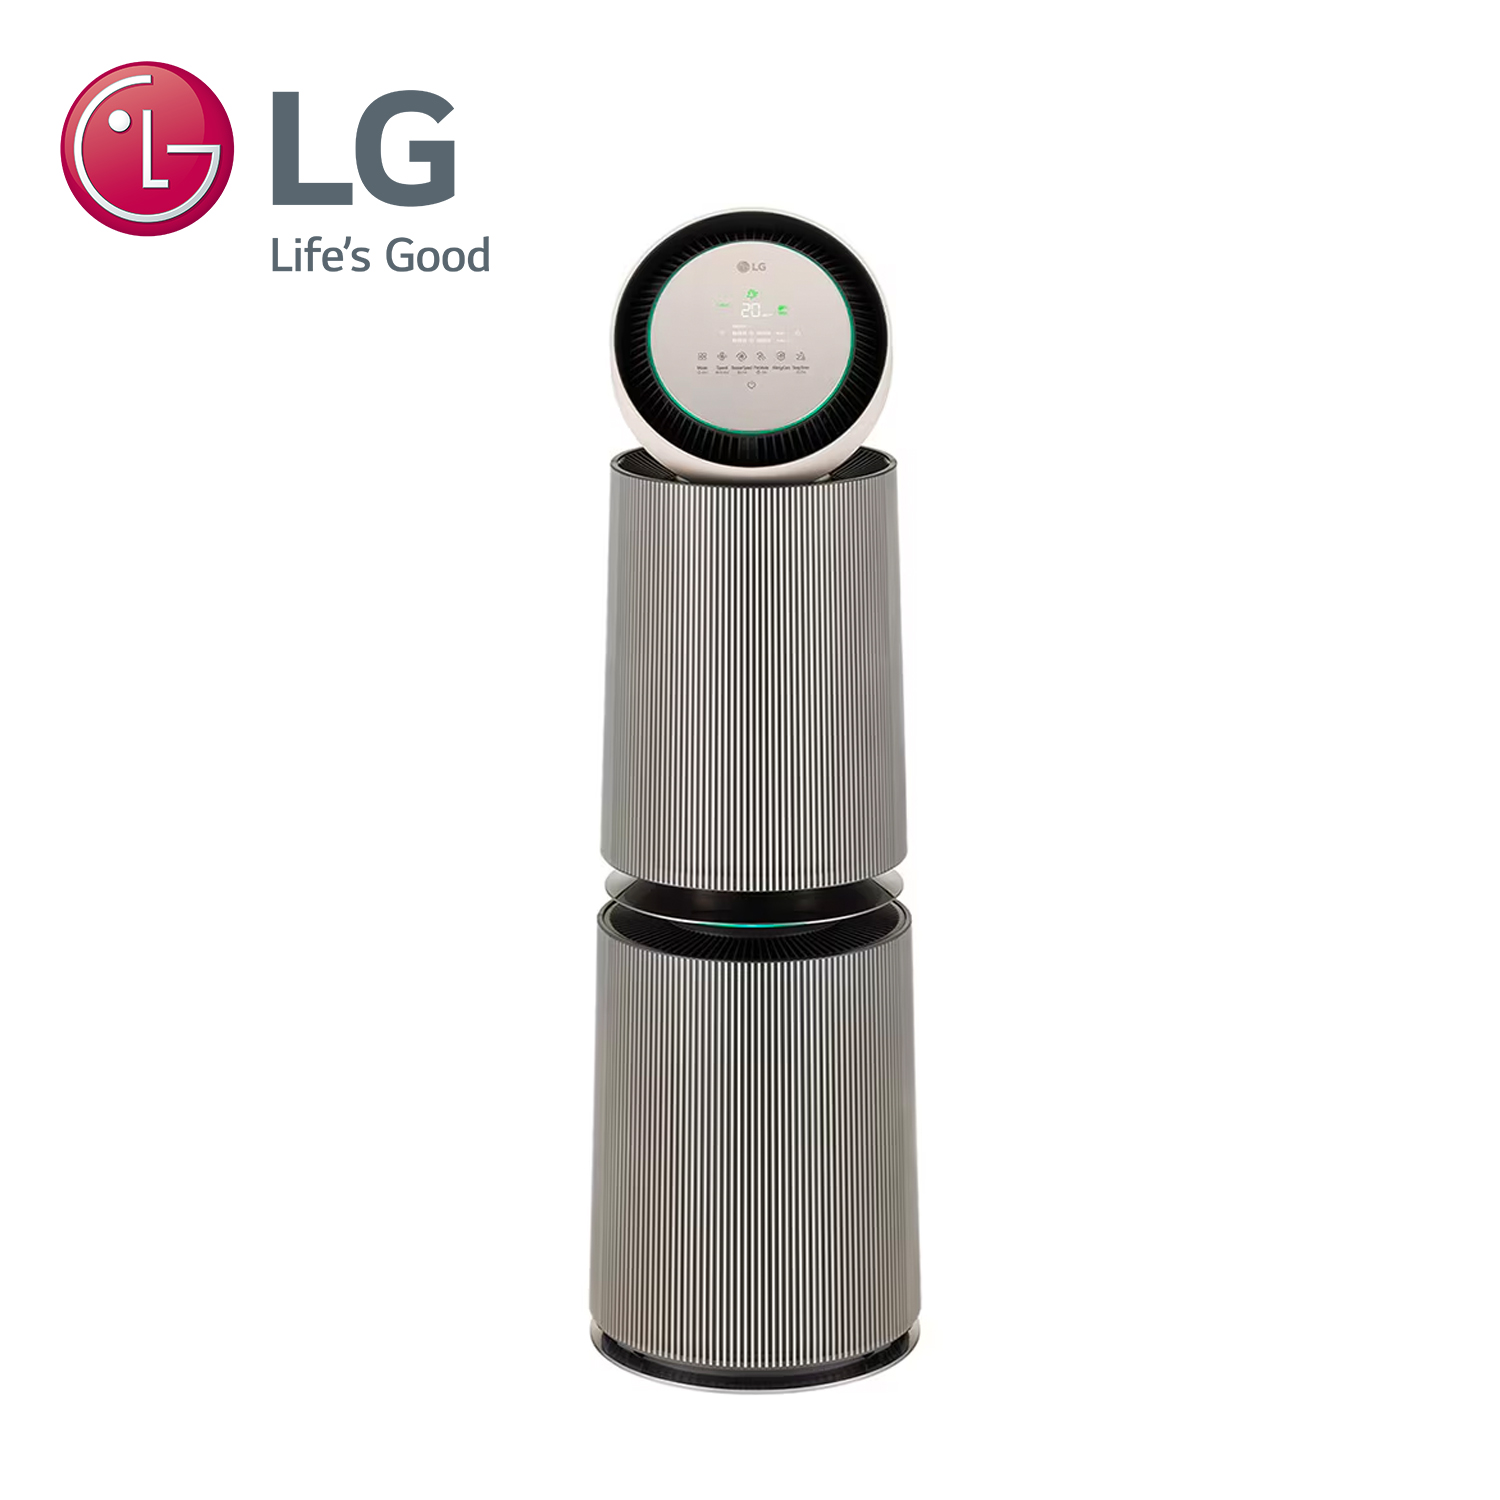 LG Air cleaner AS101DBY0, , large